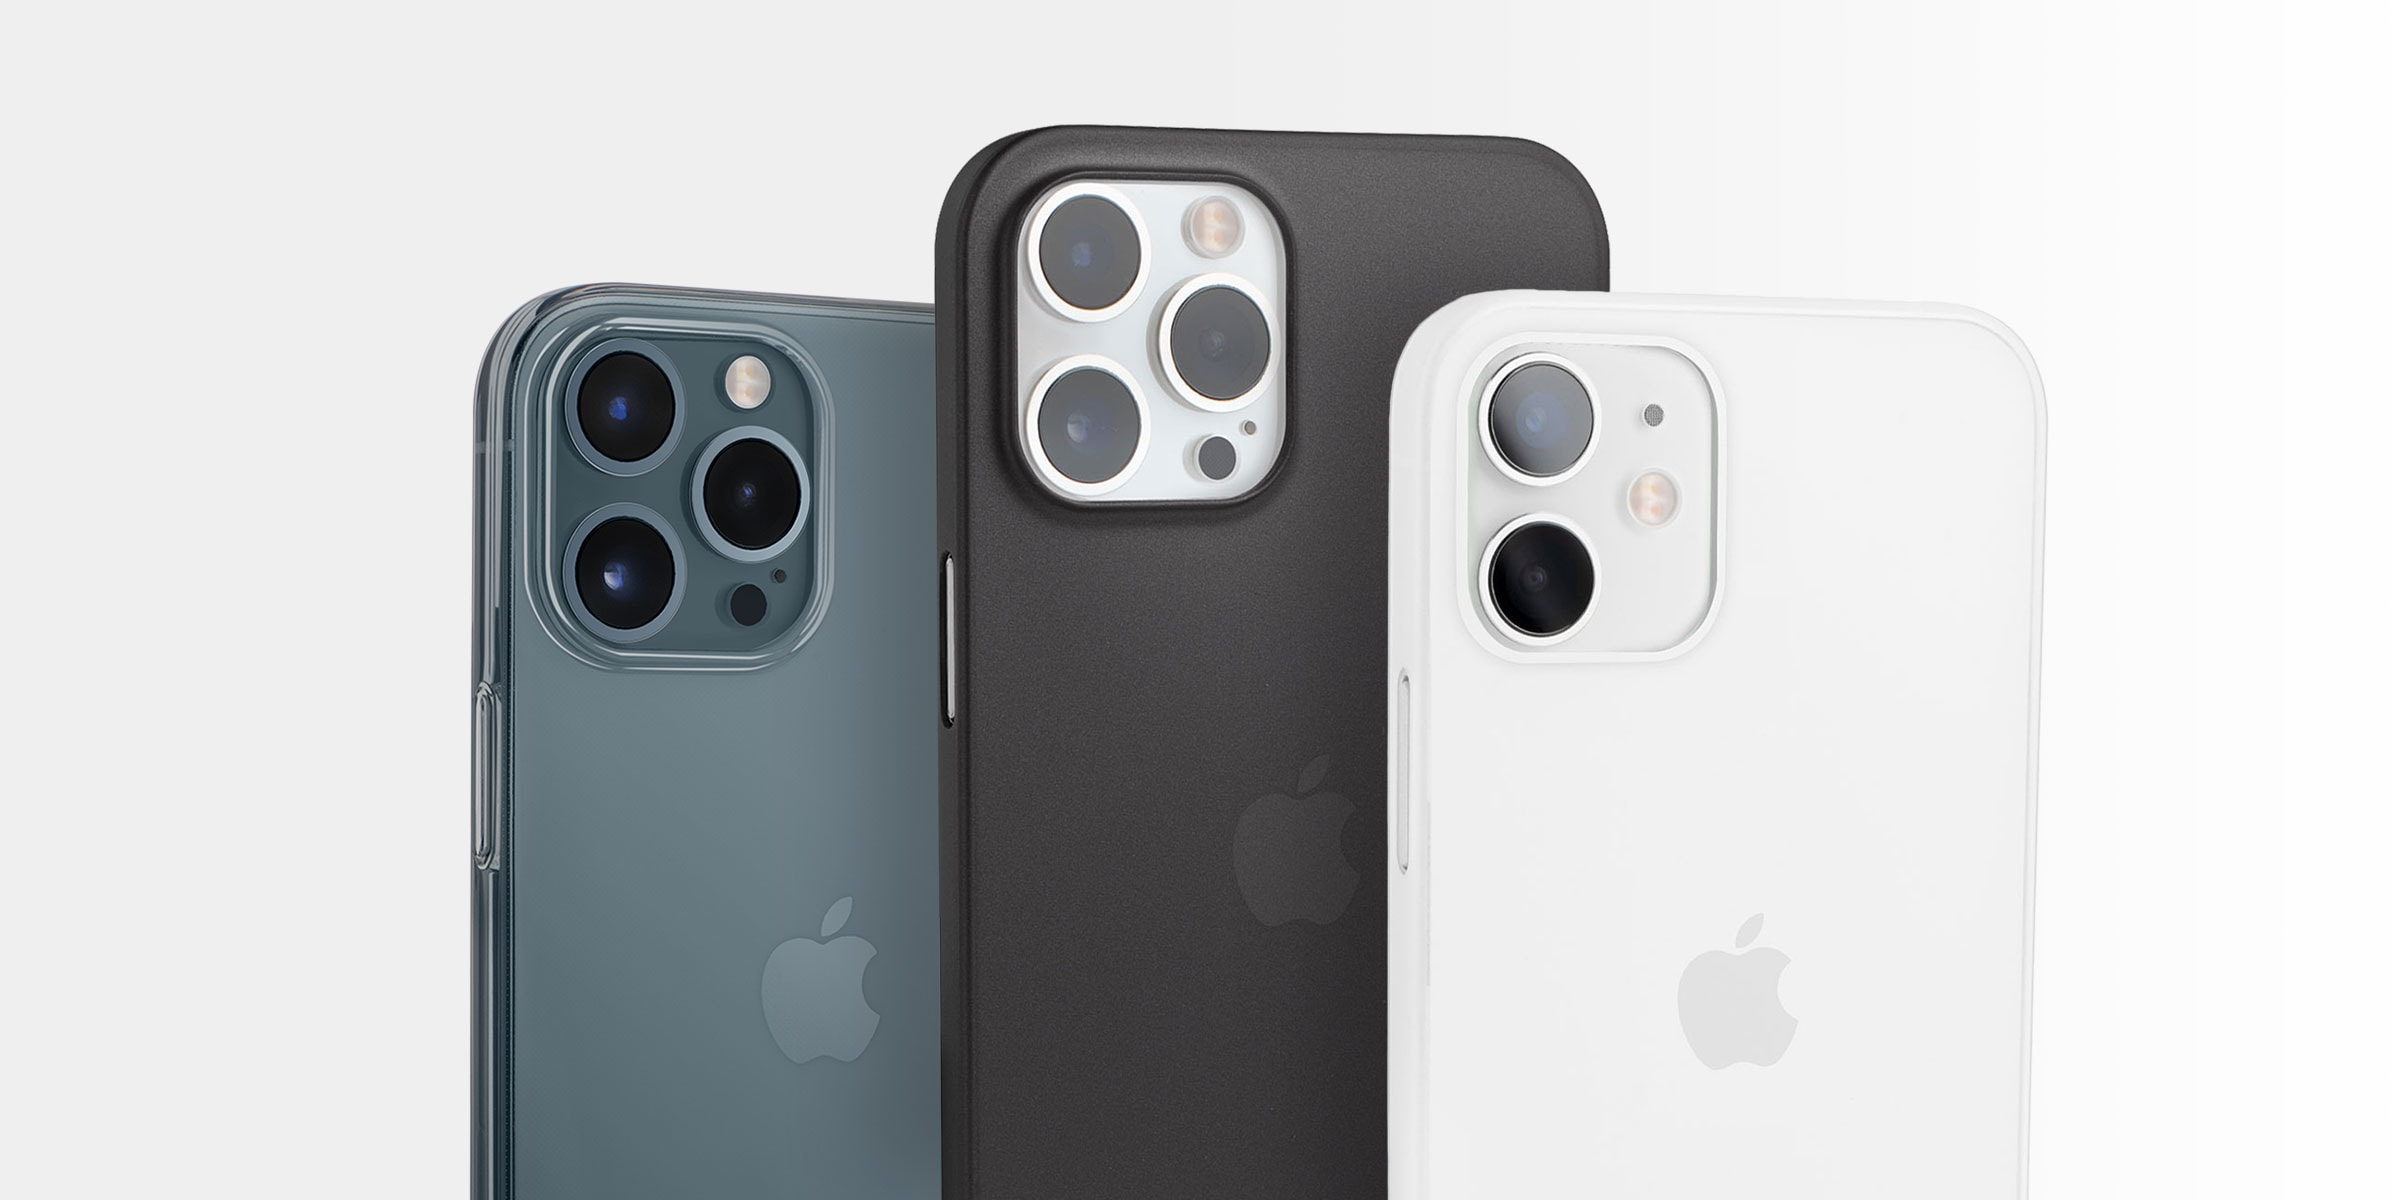 Totallee's thin iPhone 12 cases feature a raised lip that helps protect the cameras.